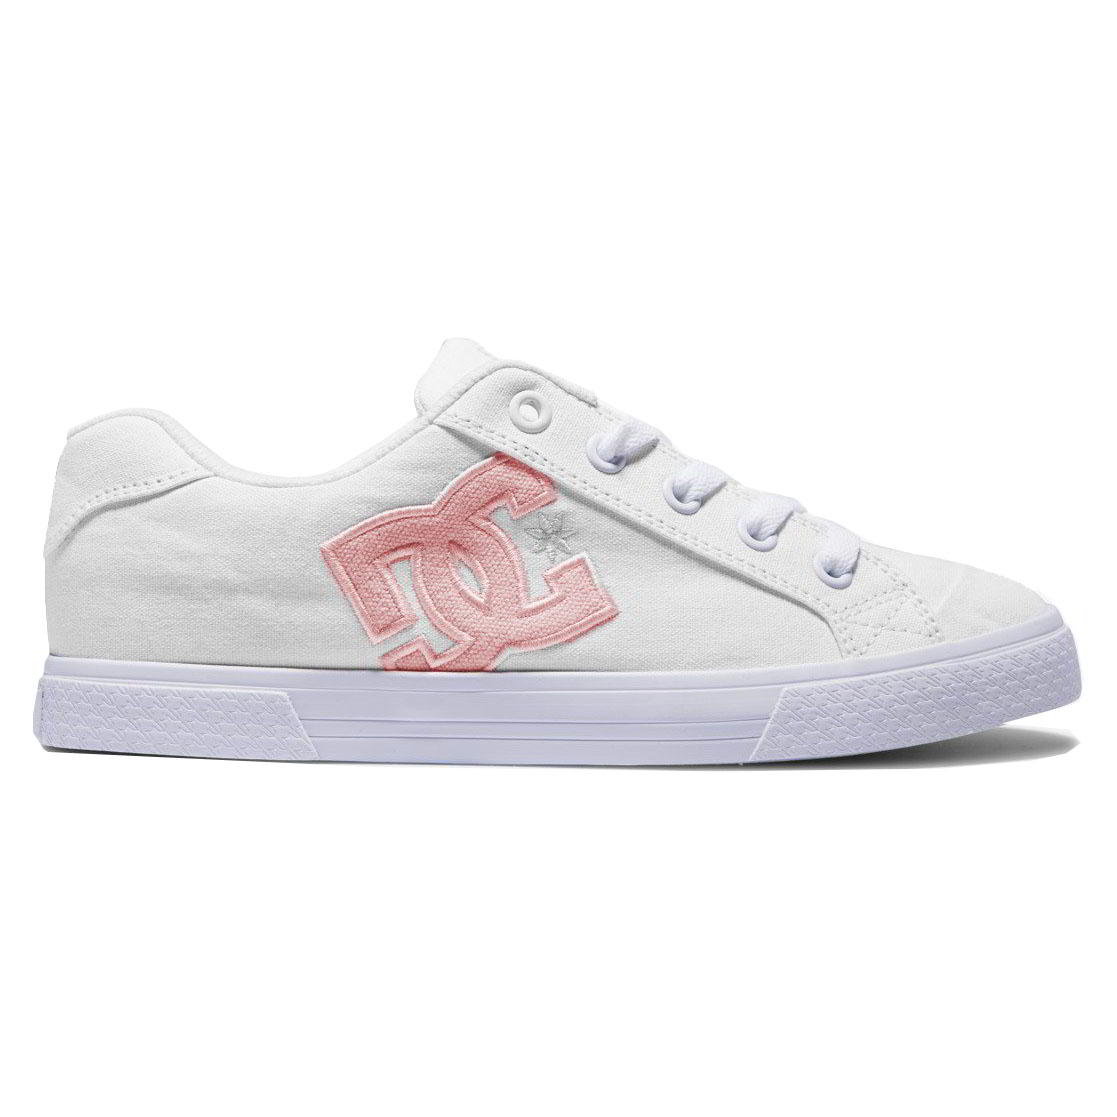 DC Womens Chelsea Skate Shoes Trainers White Pink - UK 5.5 2951